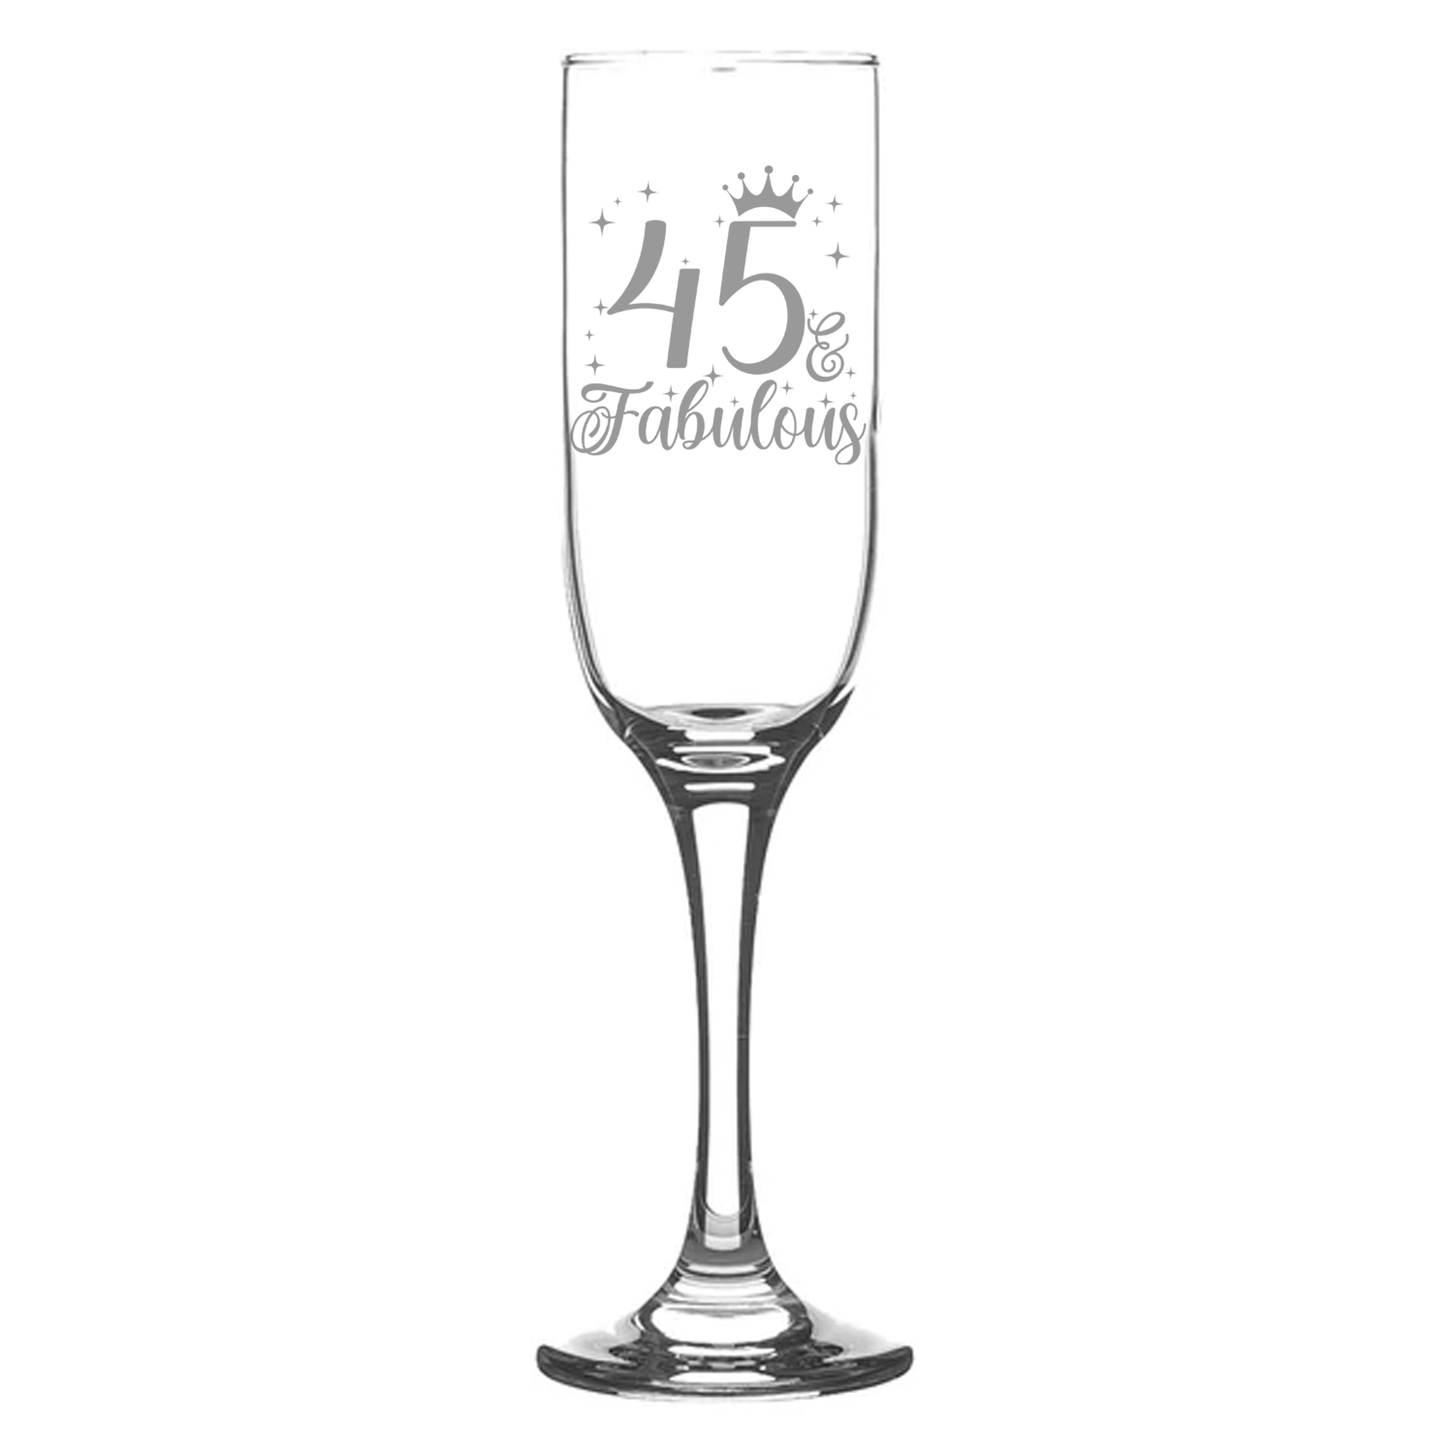 45 & Fabulous Engraved Champagne Glass and/or Coaster Set  - Always Looking Good - Champagne Glass On Its Own  